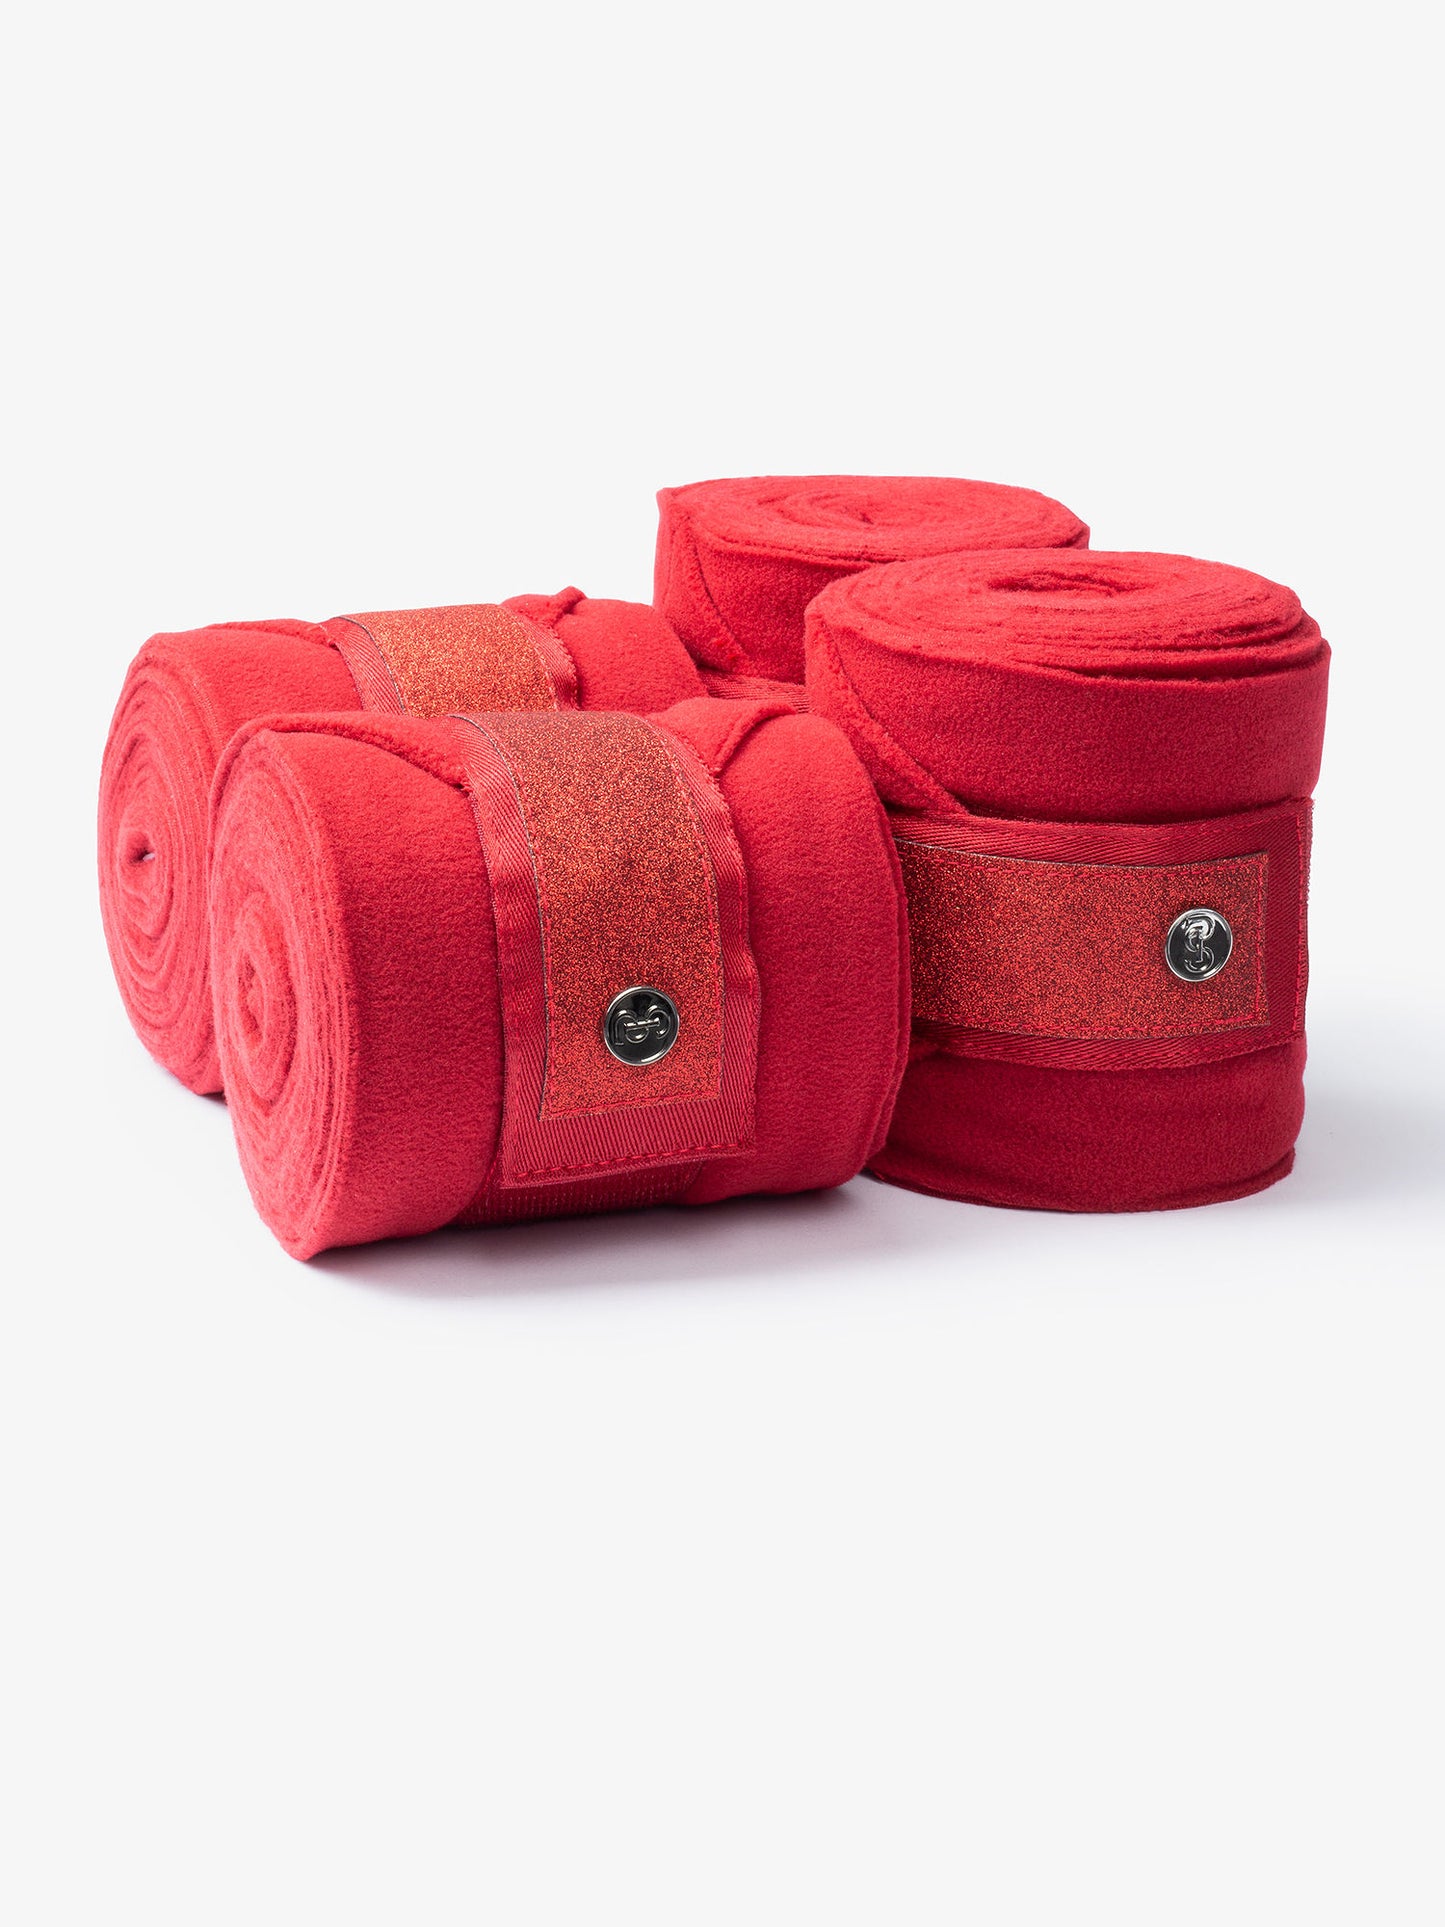 Ps of Sweden - Stardust Christmas Collection - Bandages - Red